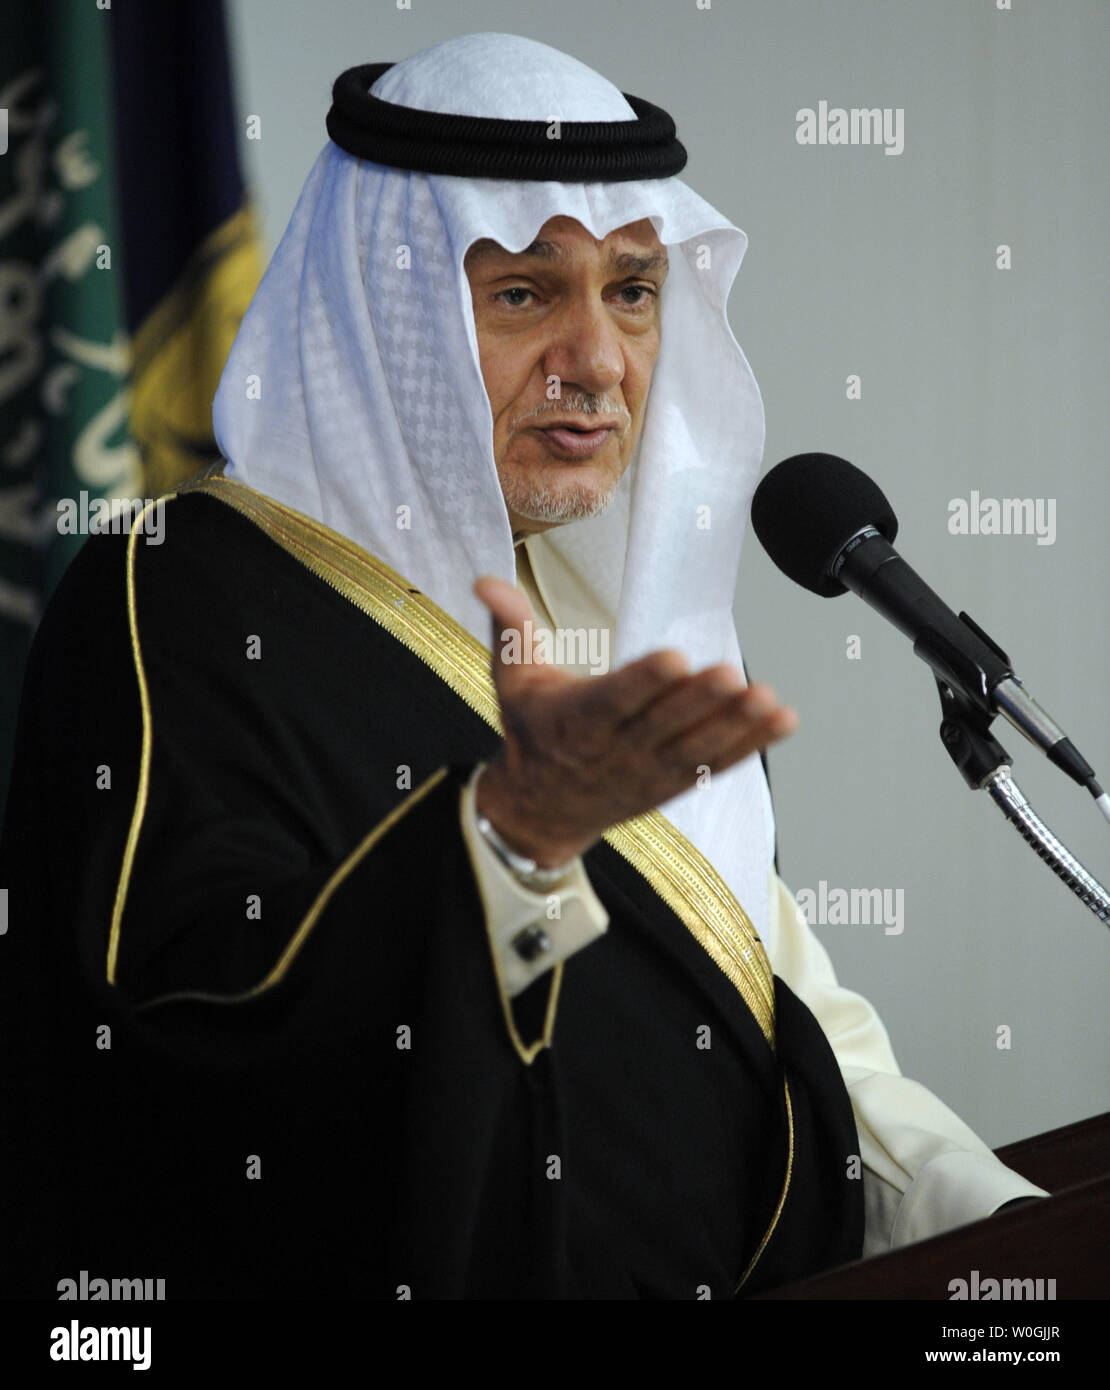 Prince Turki Al Faisal of Saudi Arabia, former director general of the Saudi General Intelligence Directorate and former Saudi ambassador to the United States, discusses the alleged Iranian plot to assassinate the Saudi Arabian ambassador to the Unite States; the evolving role and rights of women in Saudi Arabia, including King Abdullah's decision to grant women the right to vote in 2015; and Saudi Arabia's support for Palestinian UN membership and statehood recognition during a news conference at the National Press Club in Washington on November 15, 2011.   UPI/Roger L. Wollenberg Stock Photo